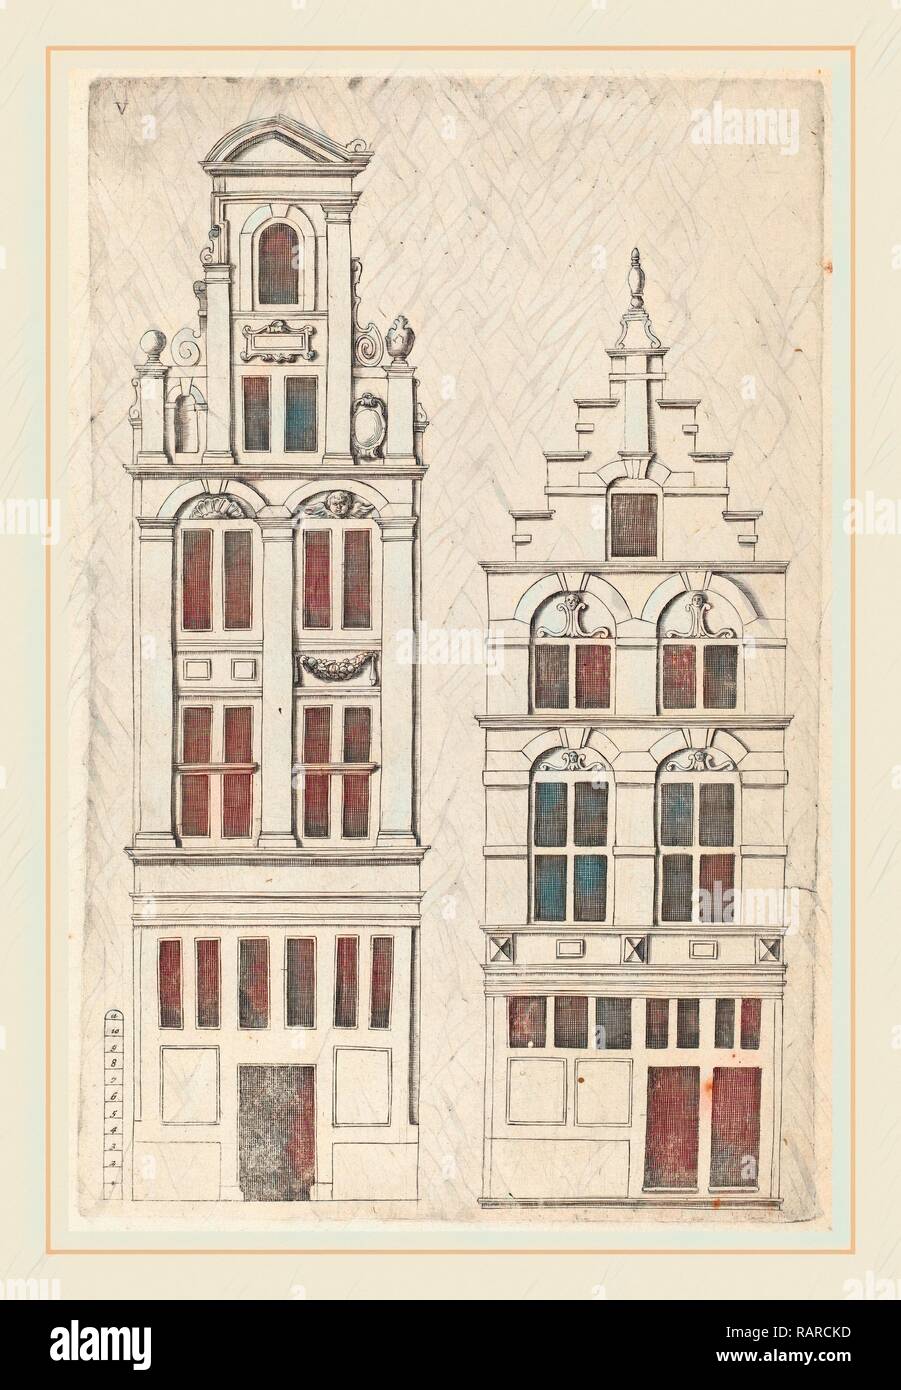 Vignola (author) and anonymous engraver after Philips Vingboons (Italian, 1507-1573), Dutch Facade Elevation: pl. 5 reimagined Stock Photo